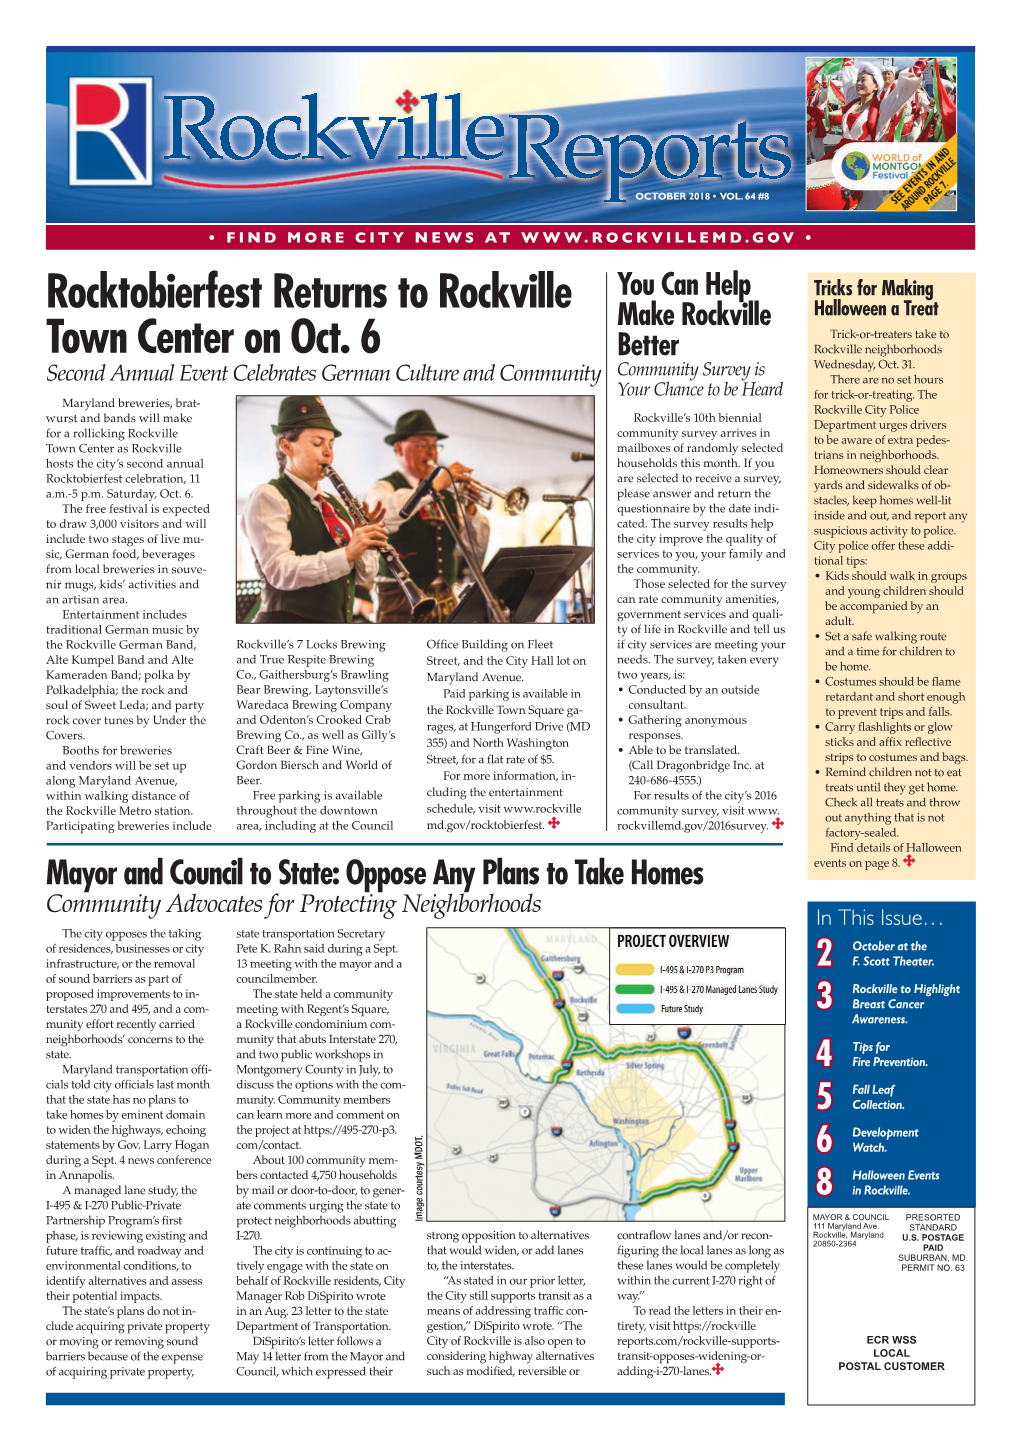 OCTOBER 2018 ROCKVILLE REPORTS (Continued from Left Column…) • Send an Email to Mayorand Mayor & Council Planning Commission to Council@Rockvillemd.Gov